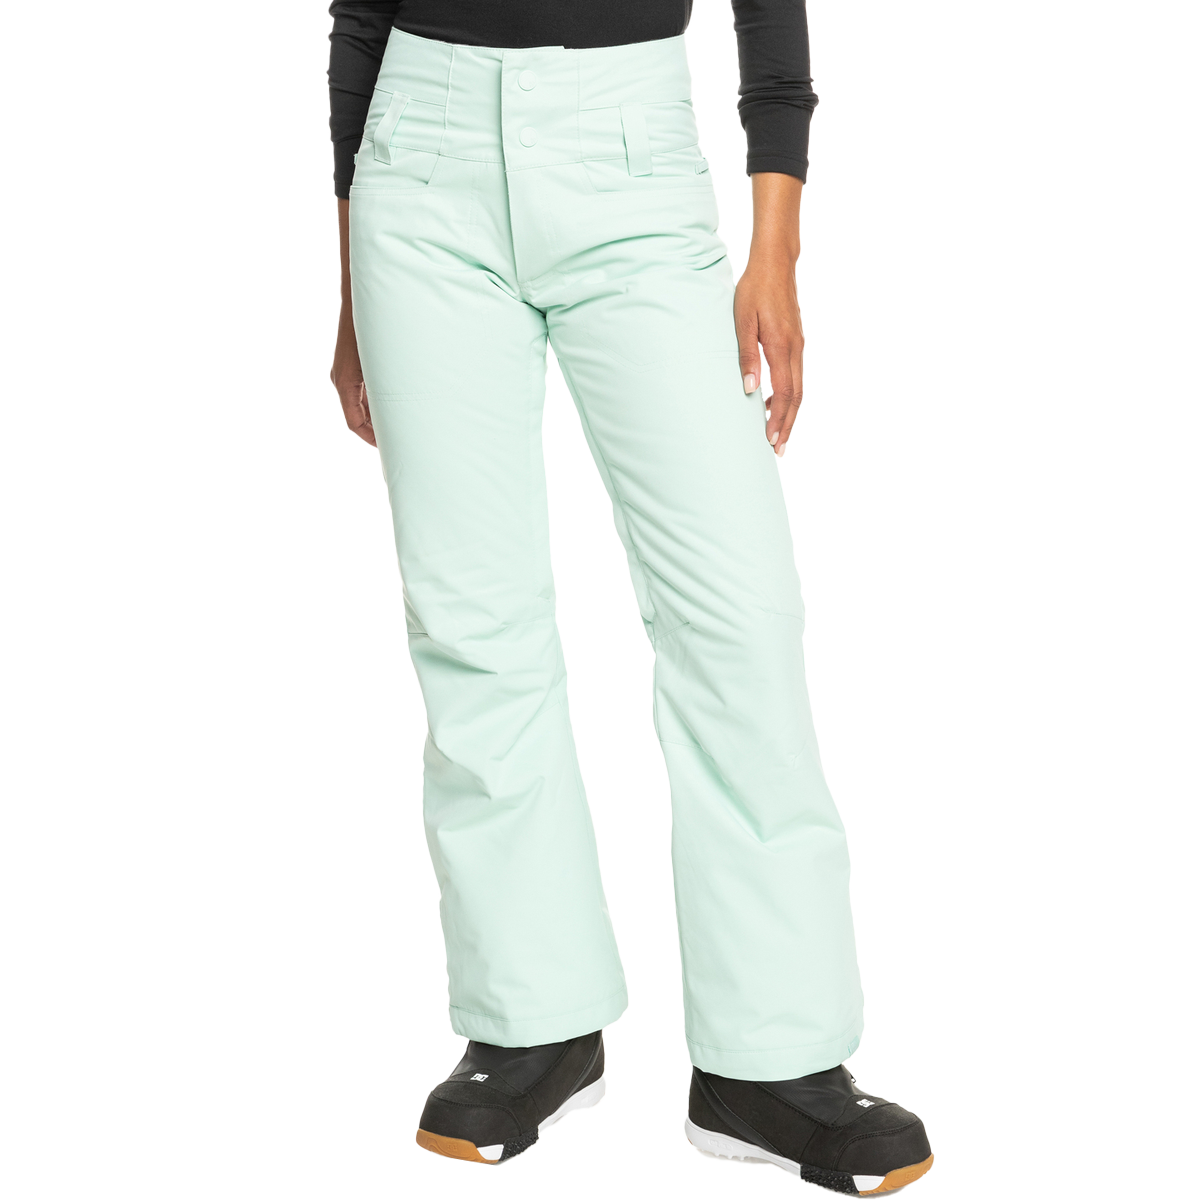 Diversion - Insulated Snow Pants for Girls